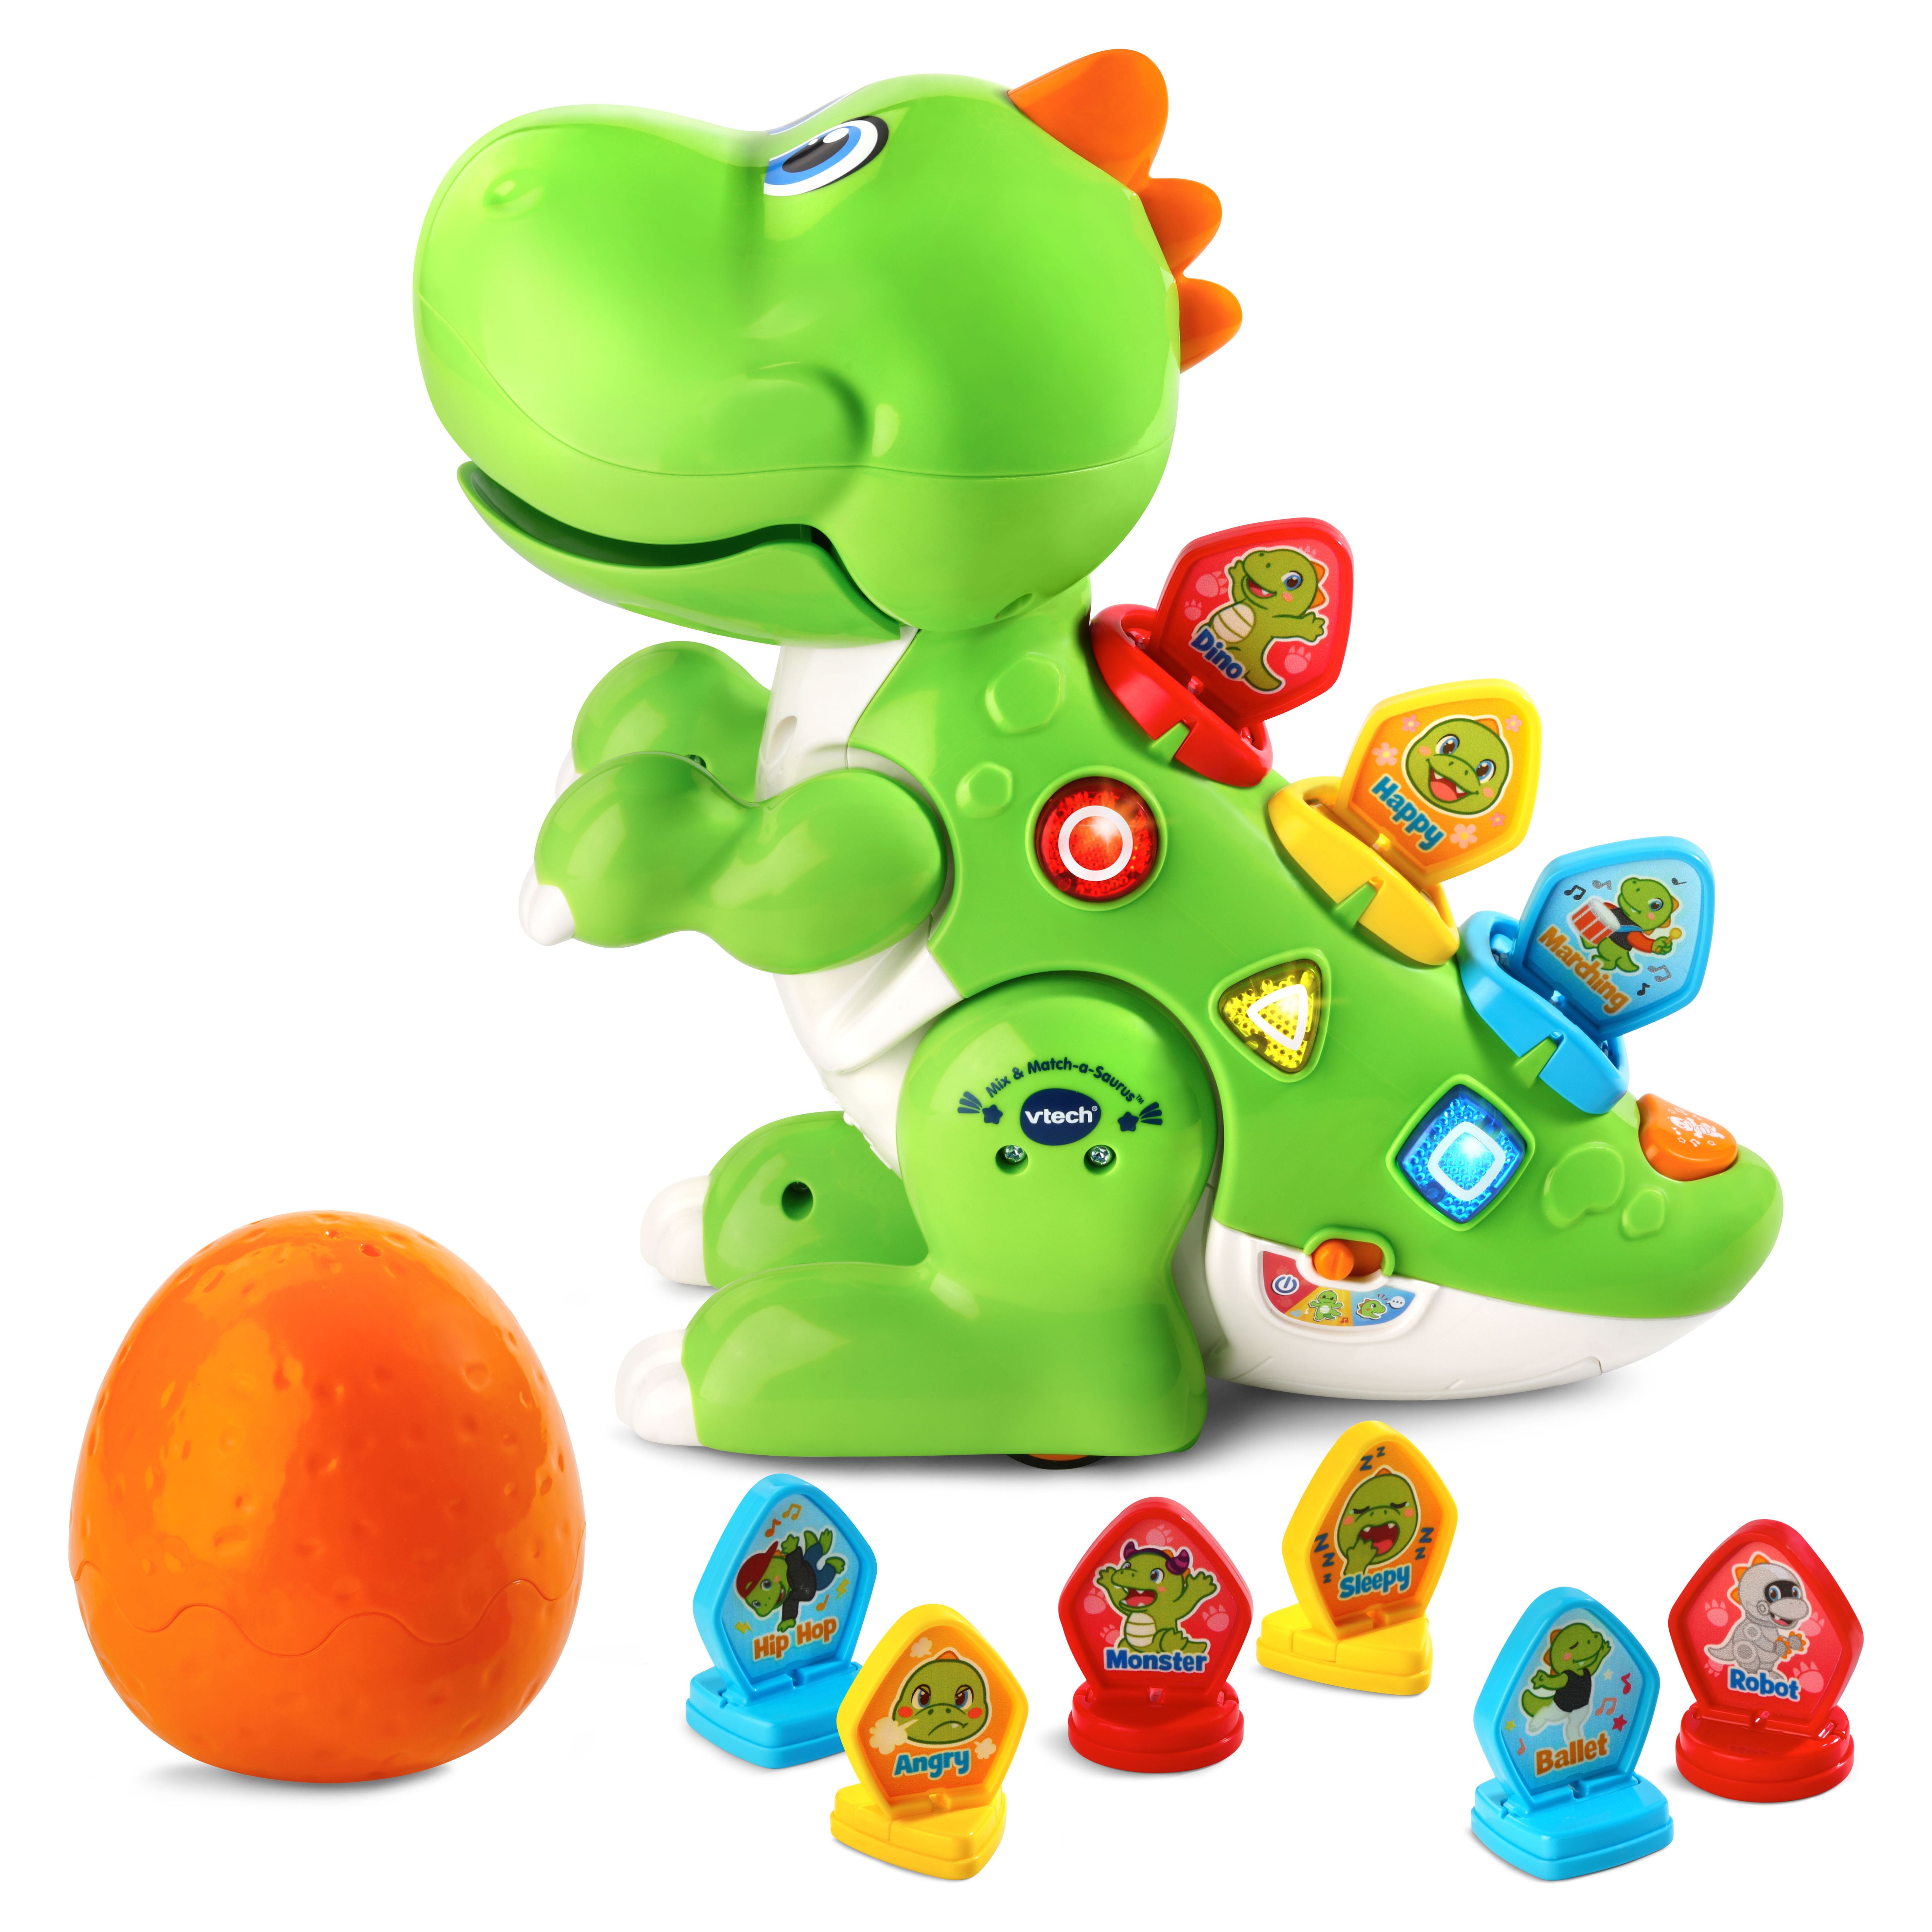 VTech Mix and Match-a-Saurus, Dinosaur Learning Toy for Kids, Green - image 1 of 10